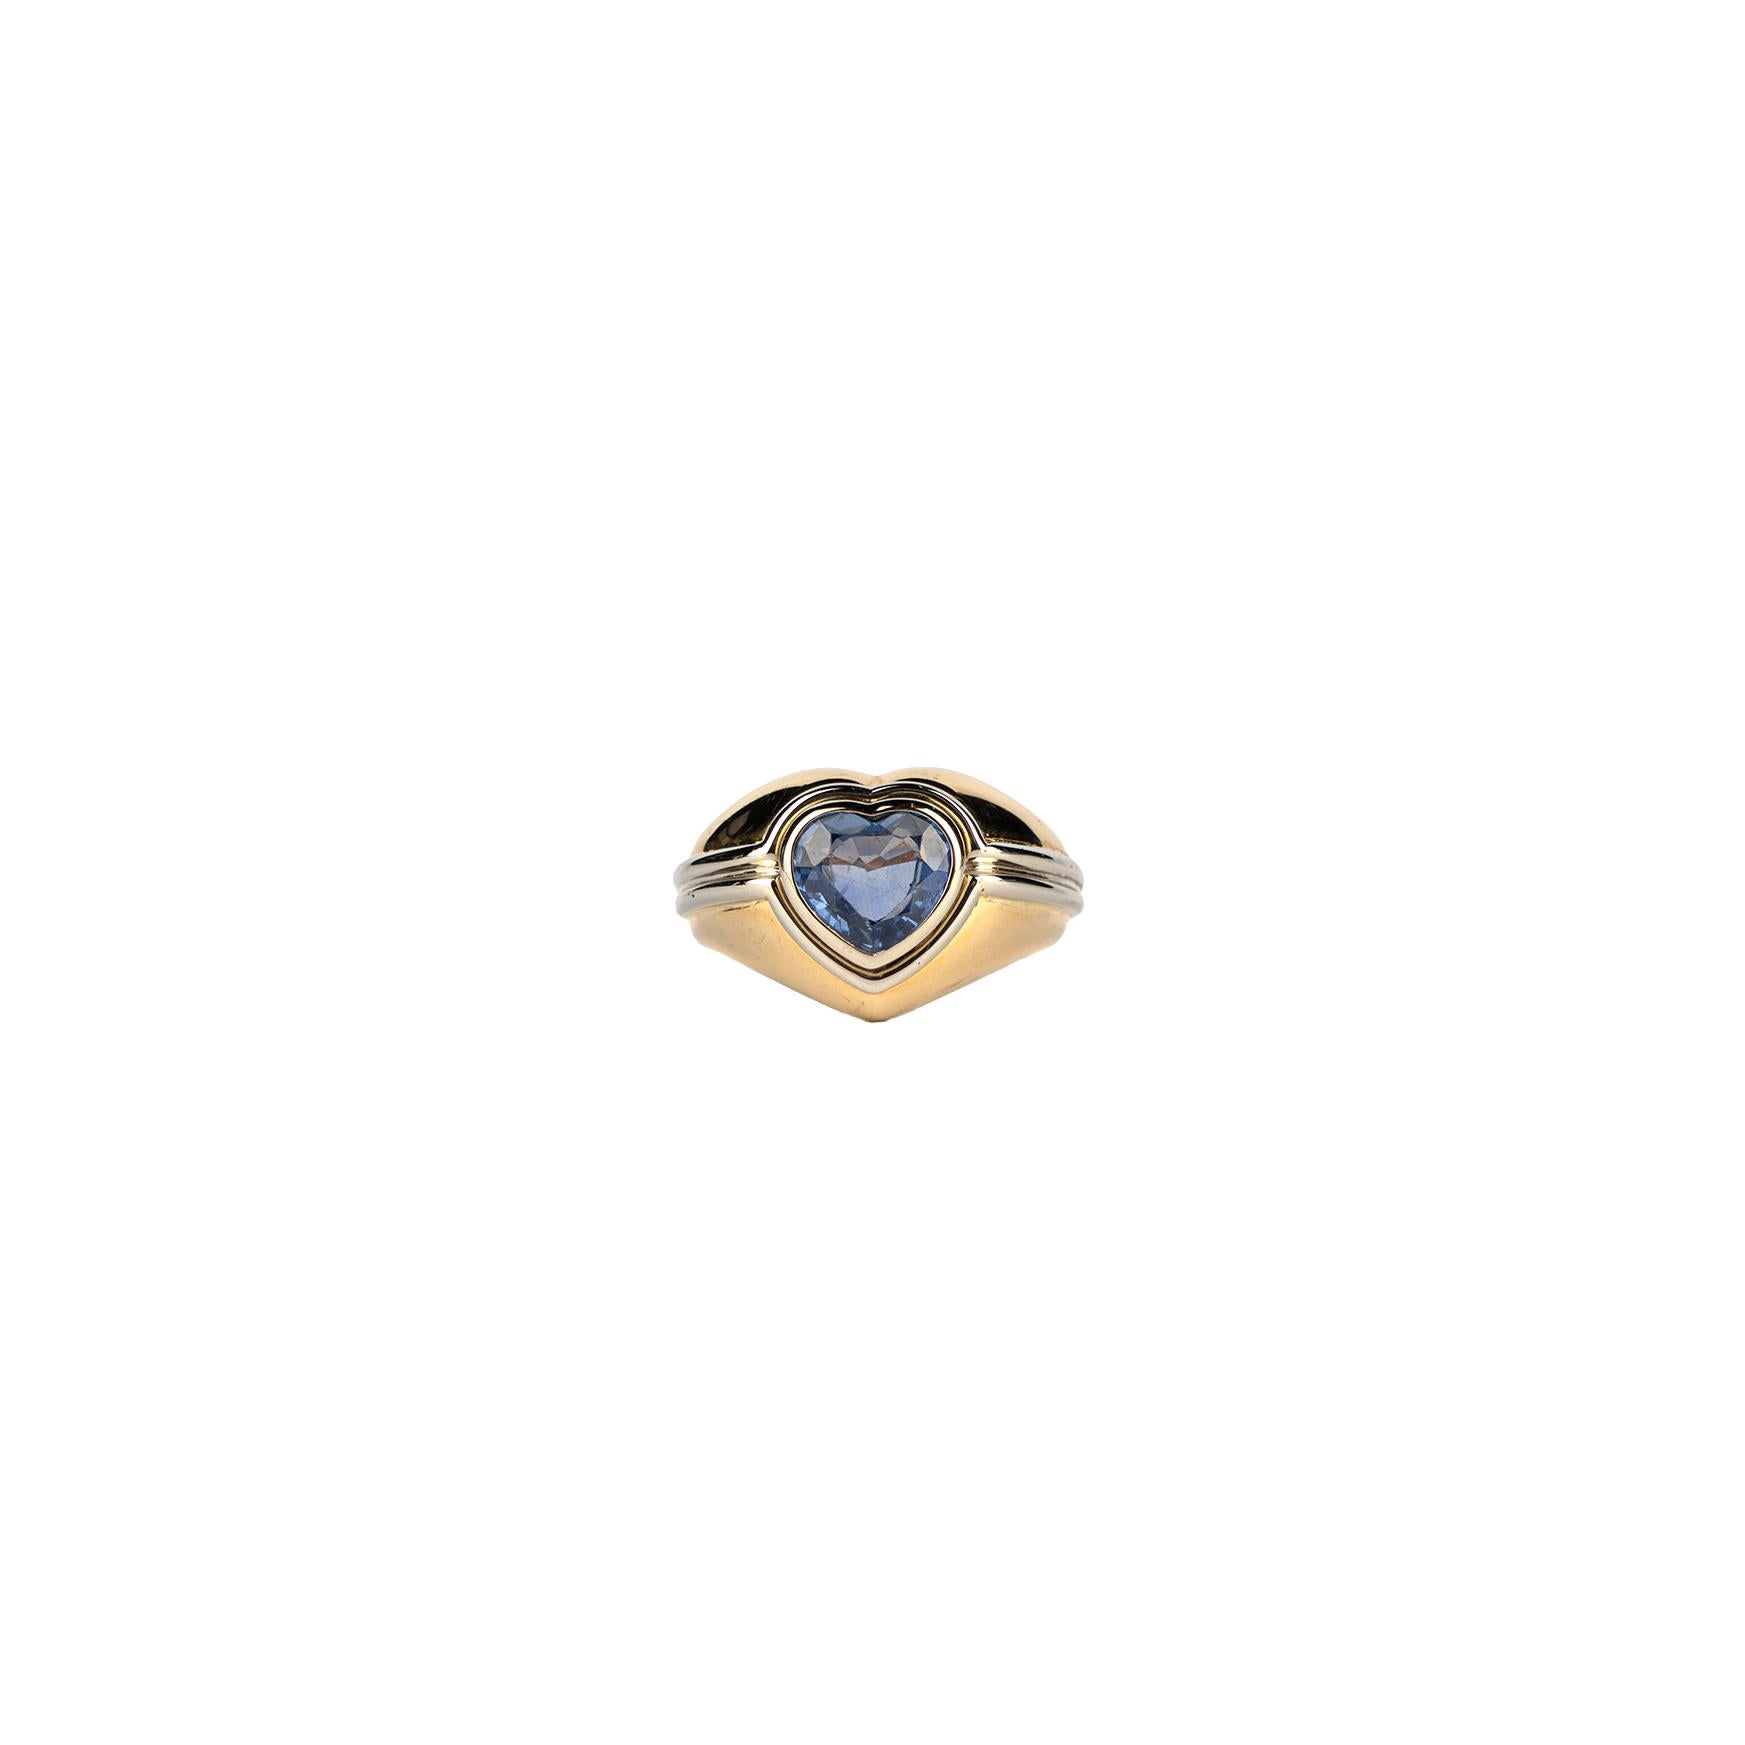 An exquisite Vintage Bulgari Sapphire Heart Ring showcasing a splendid 2.02 carat Sapphire mounted on 18k two tone gold. Made in Italy, Circa 1980.